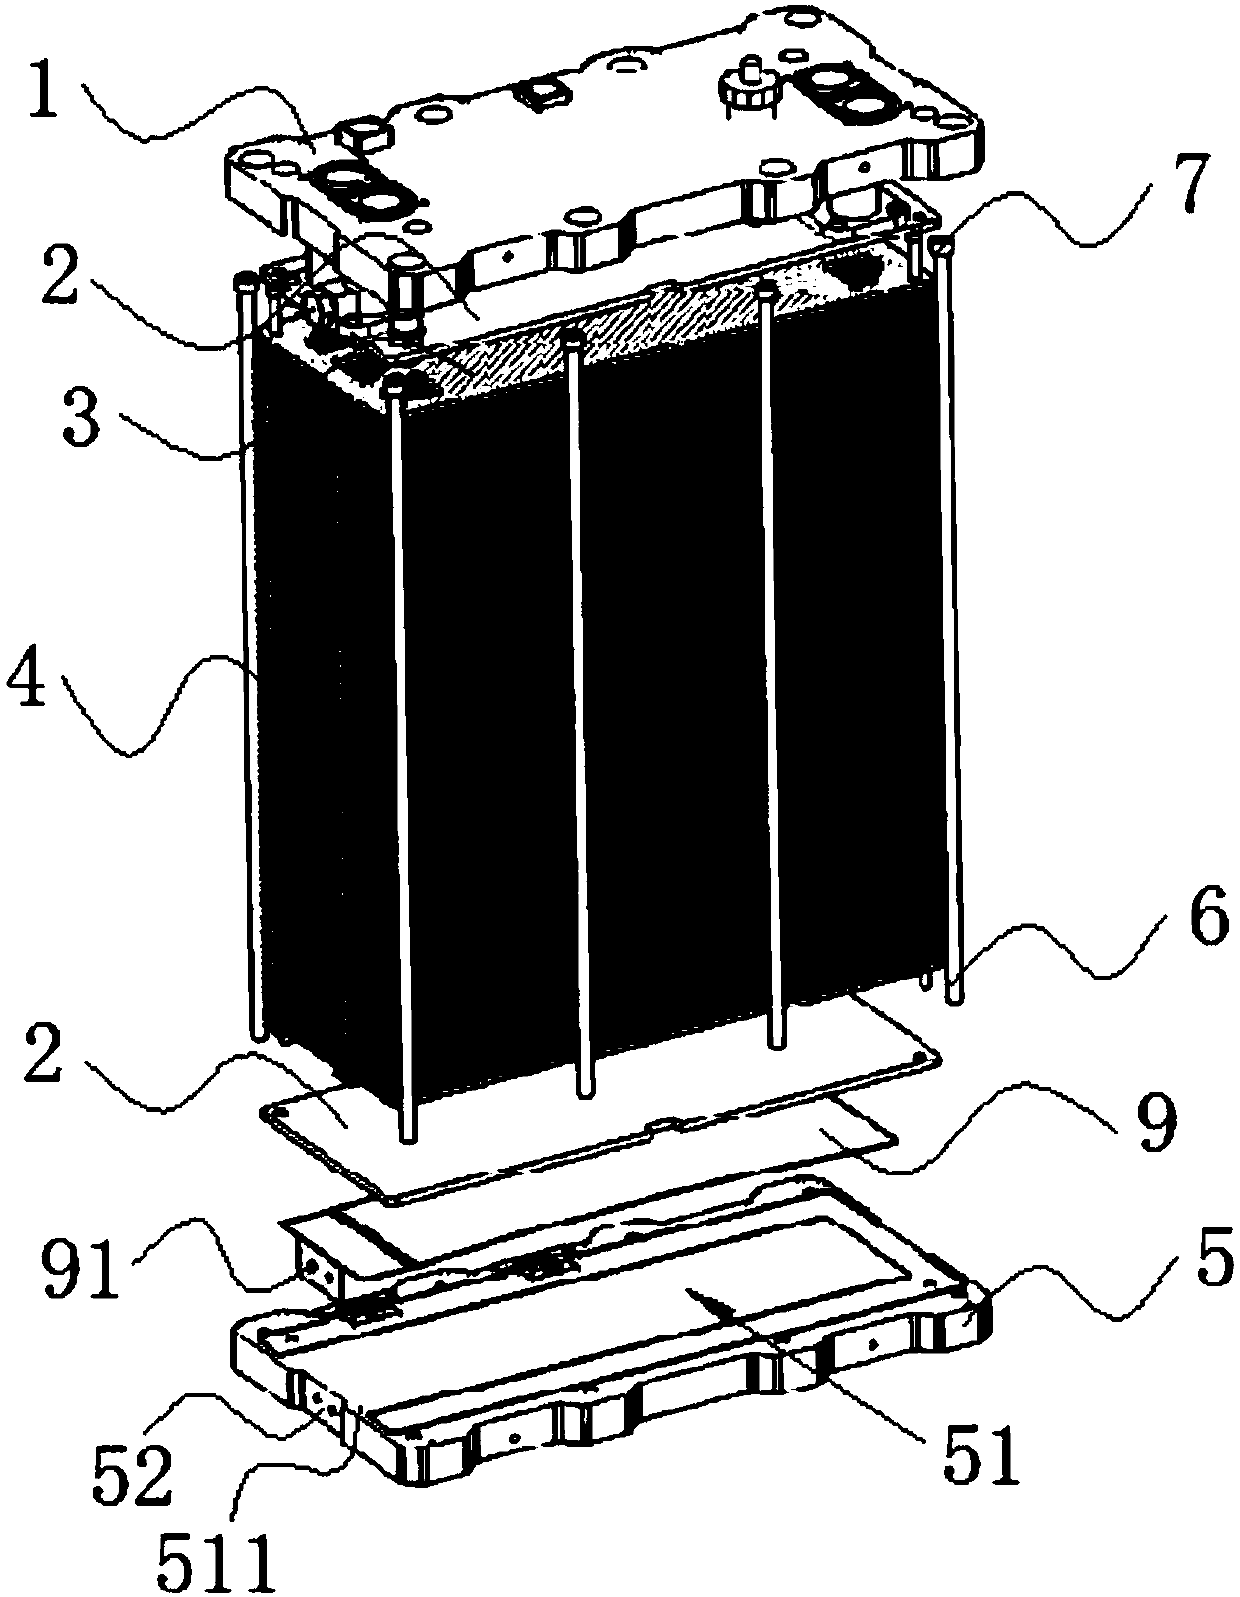 Fuel cell stack structure